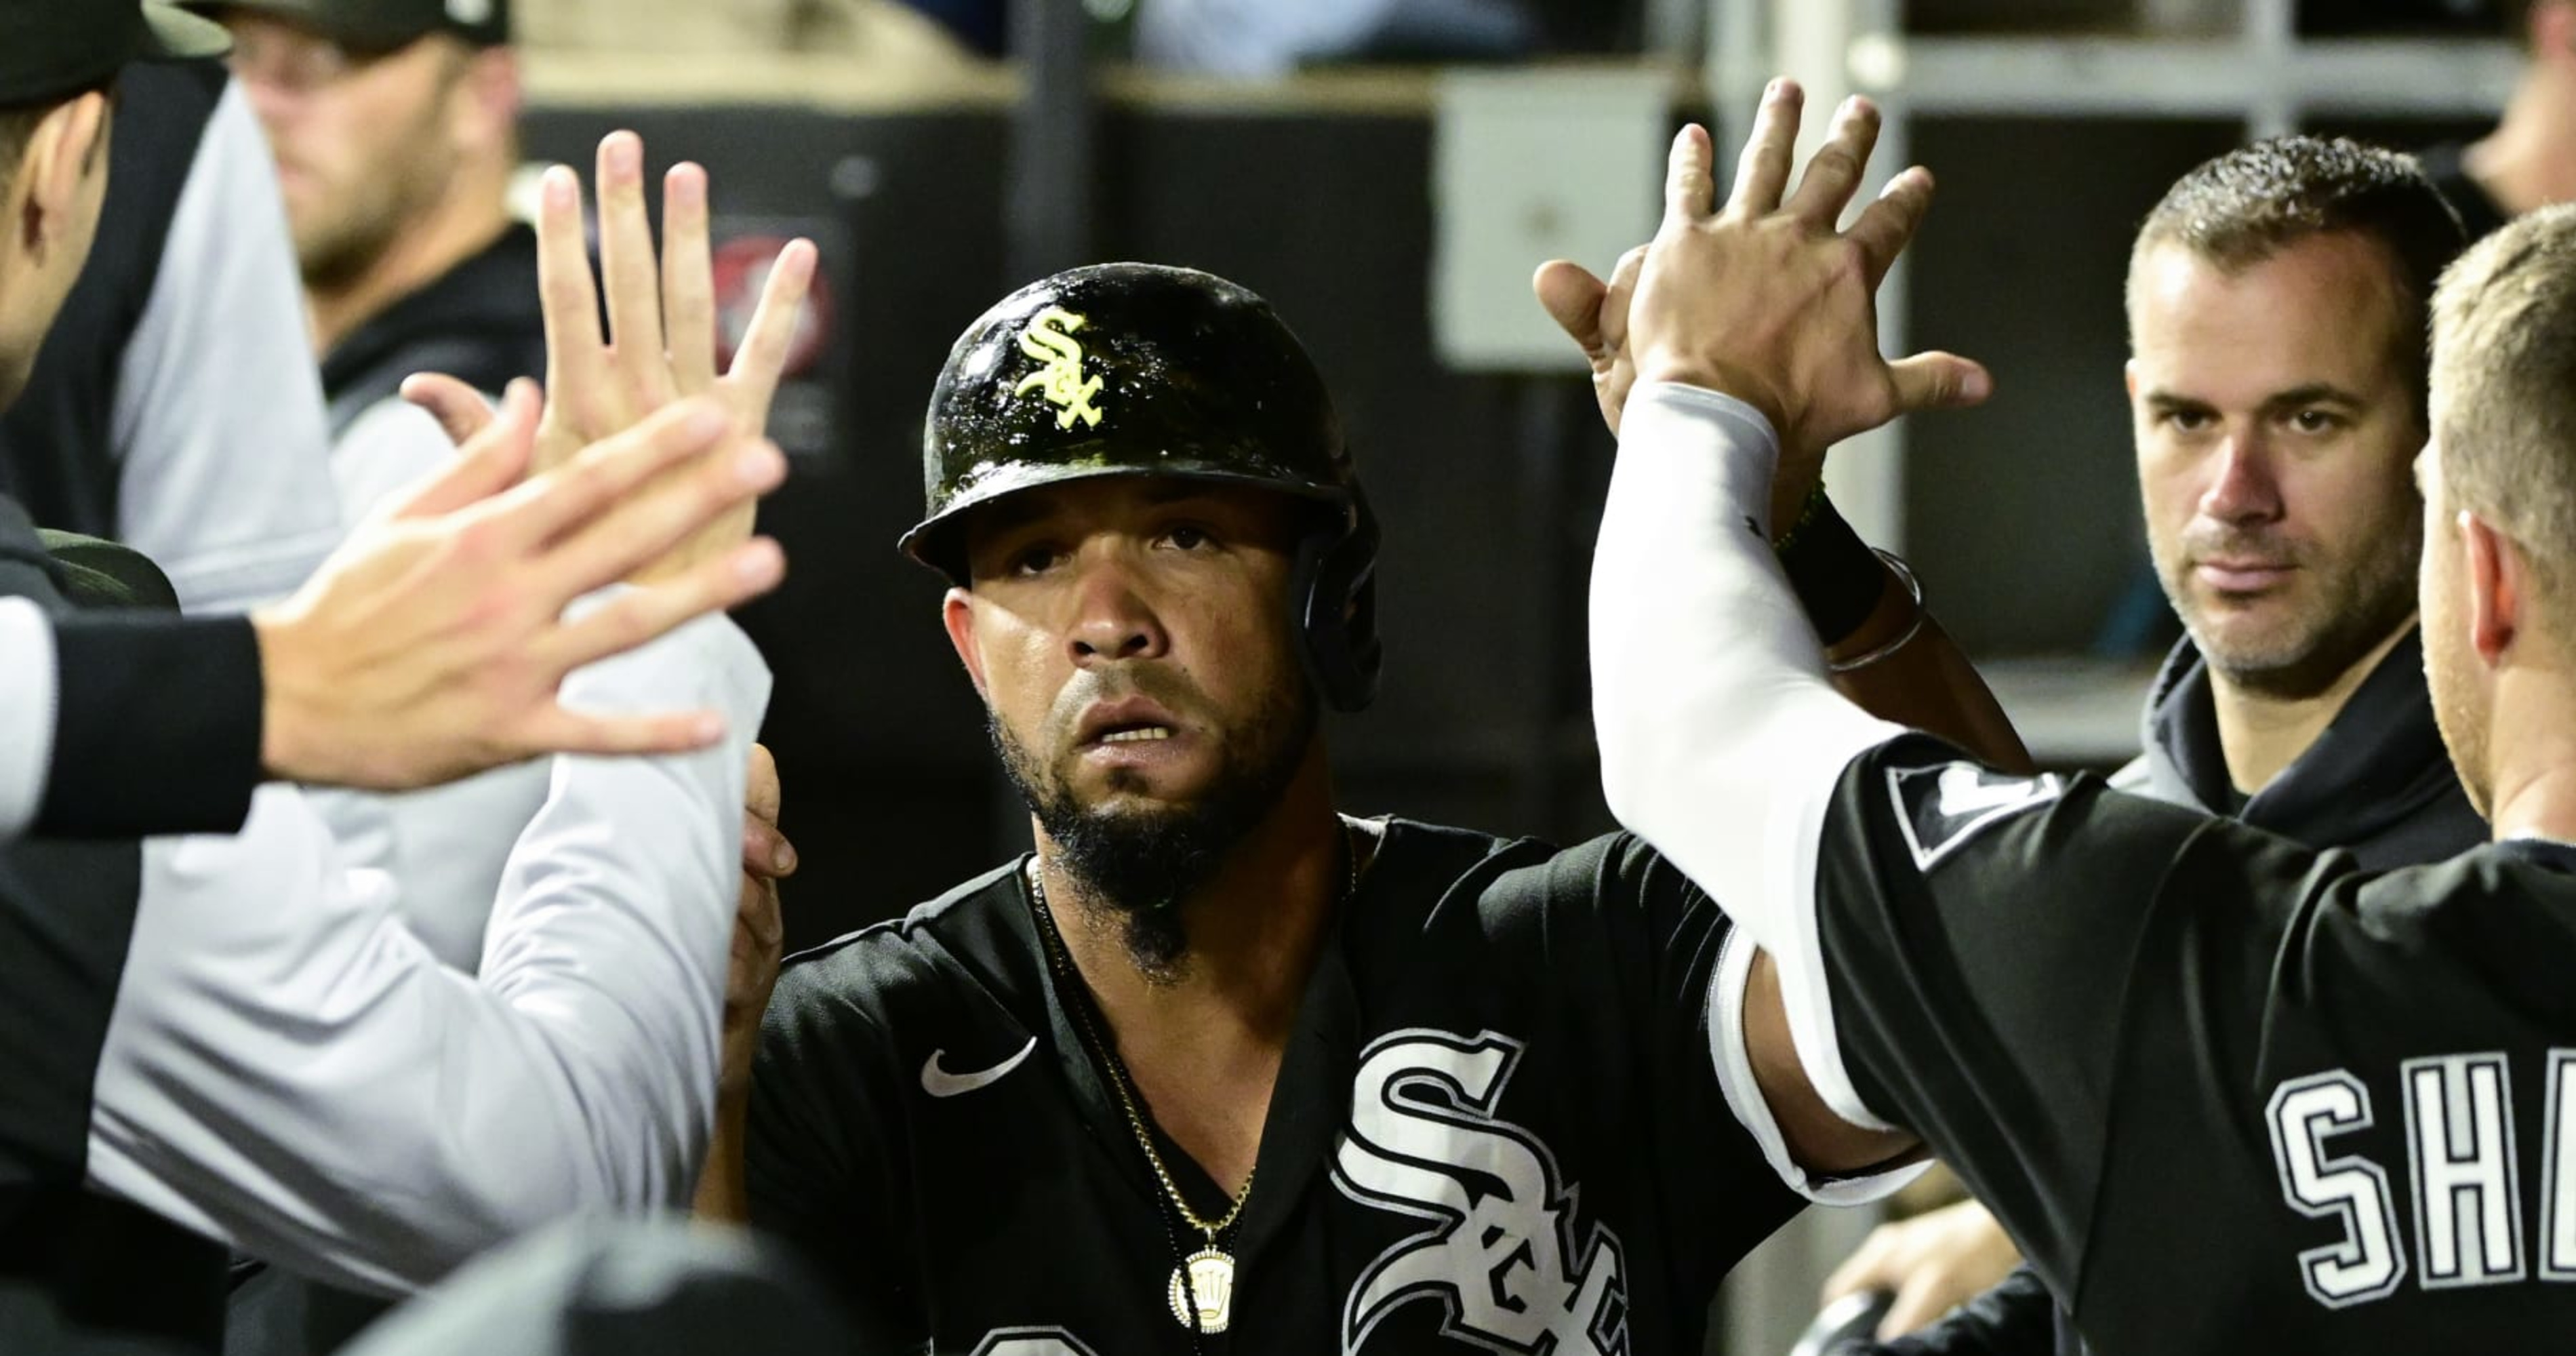 Report: José Abreu, Astros Agree to 3-year Contract Worth Around $60M in Free Ag..